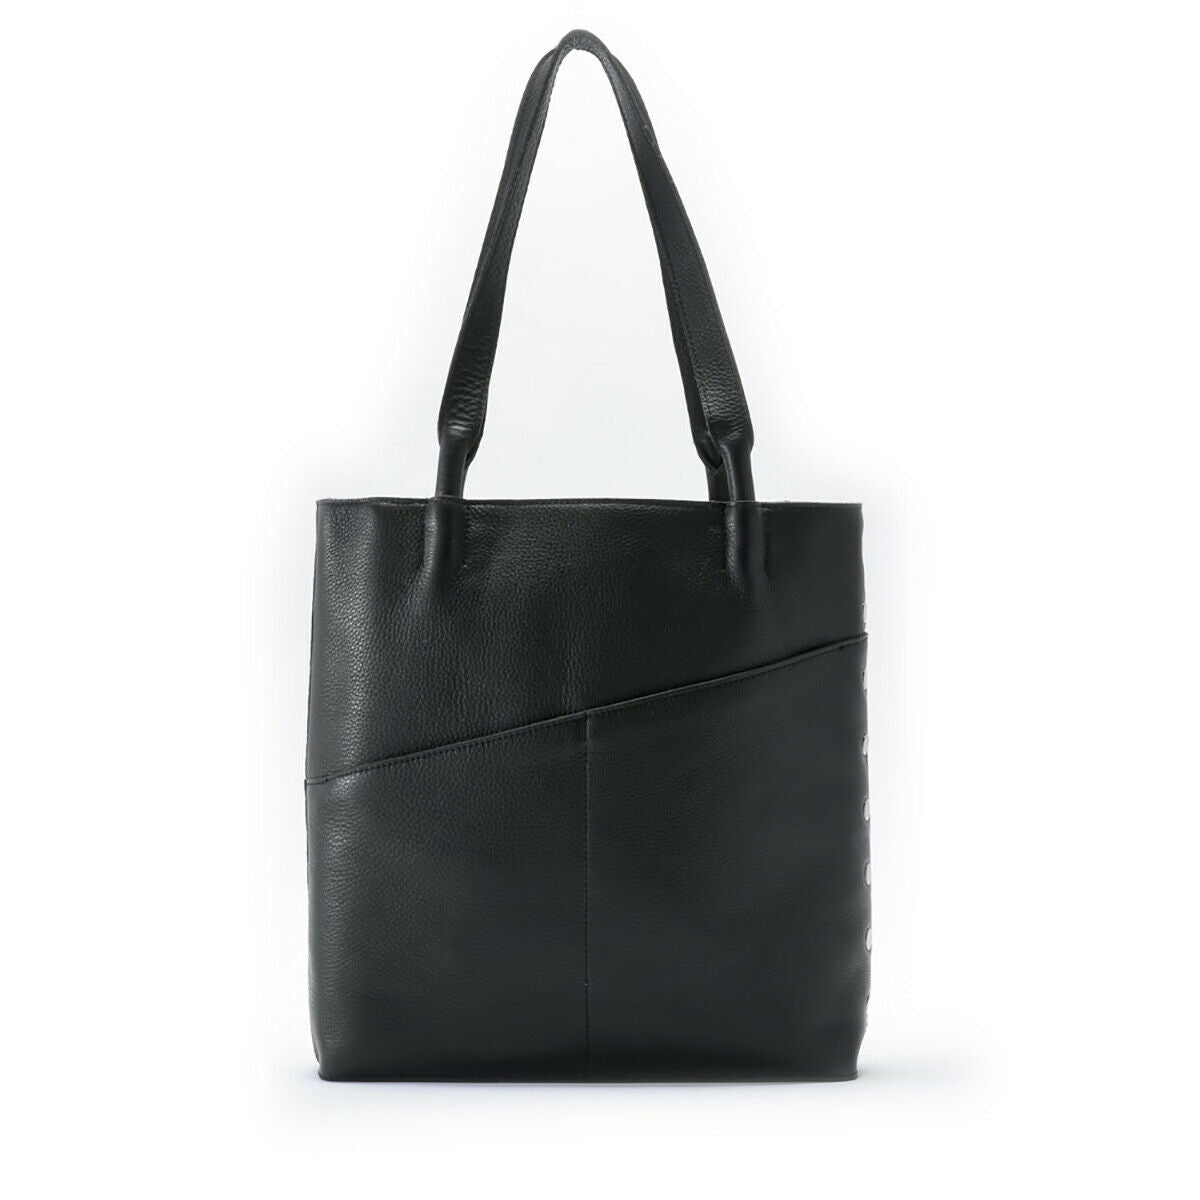 Black Leather Bag Soft Leather Bag Slouchy Leather Bag 